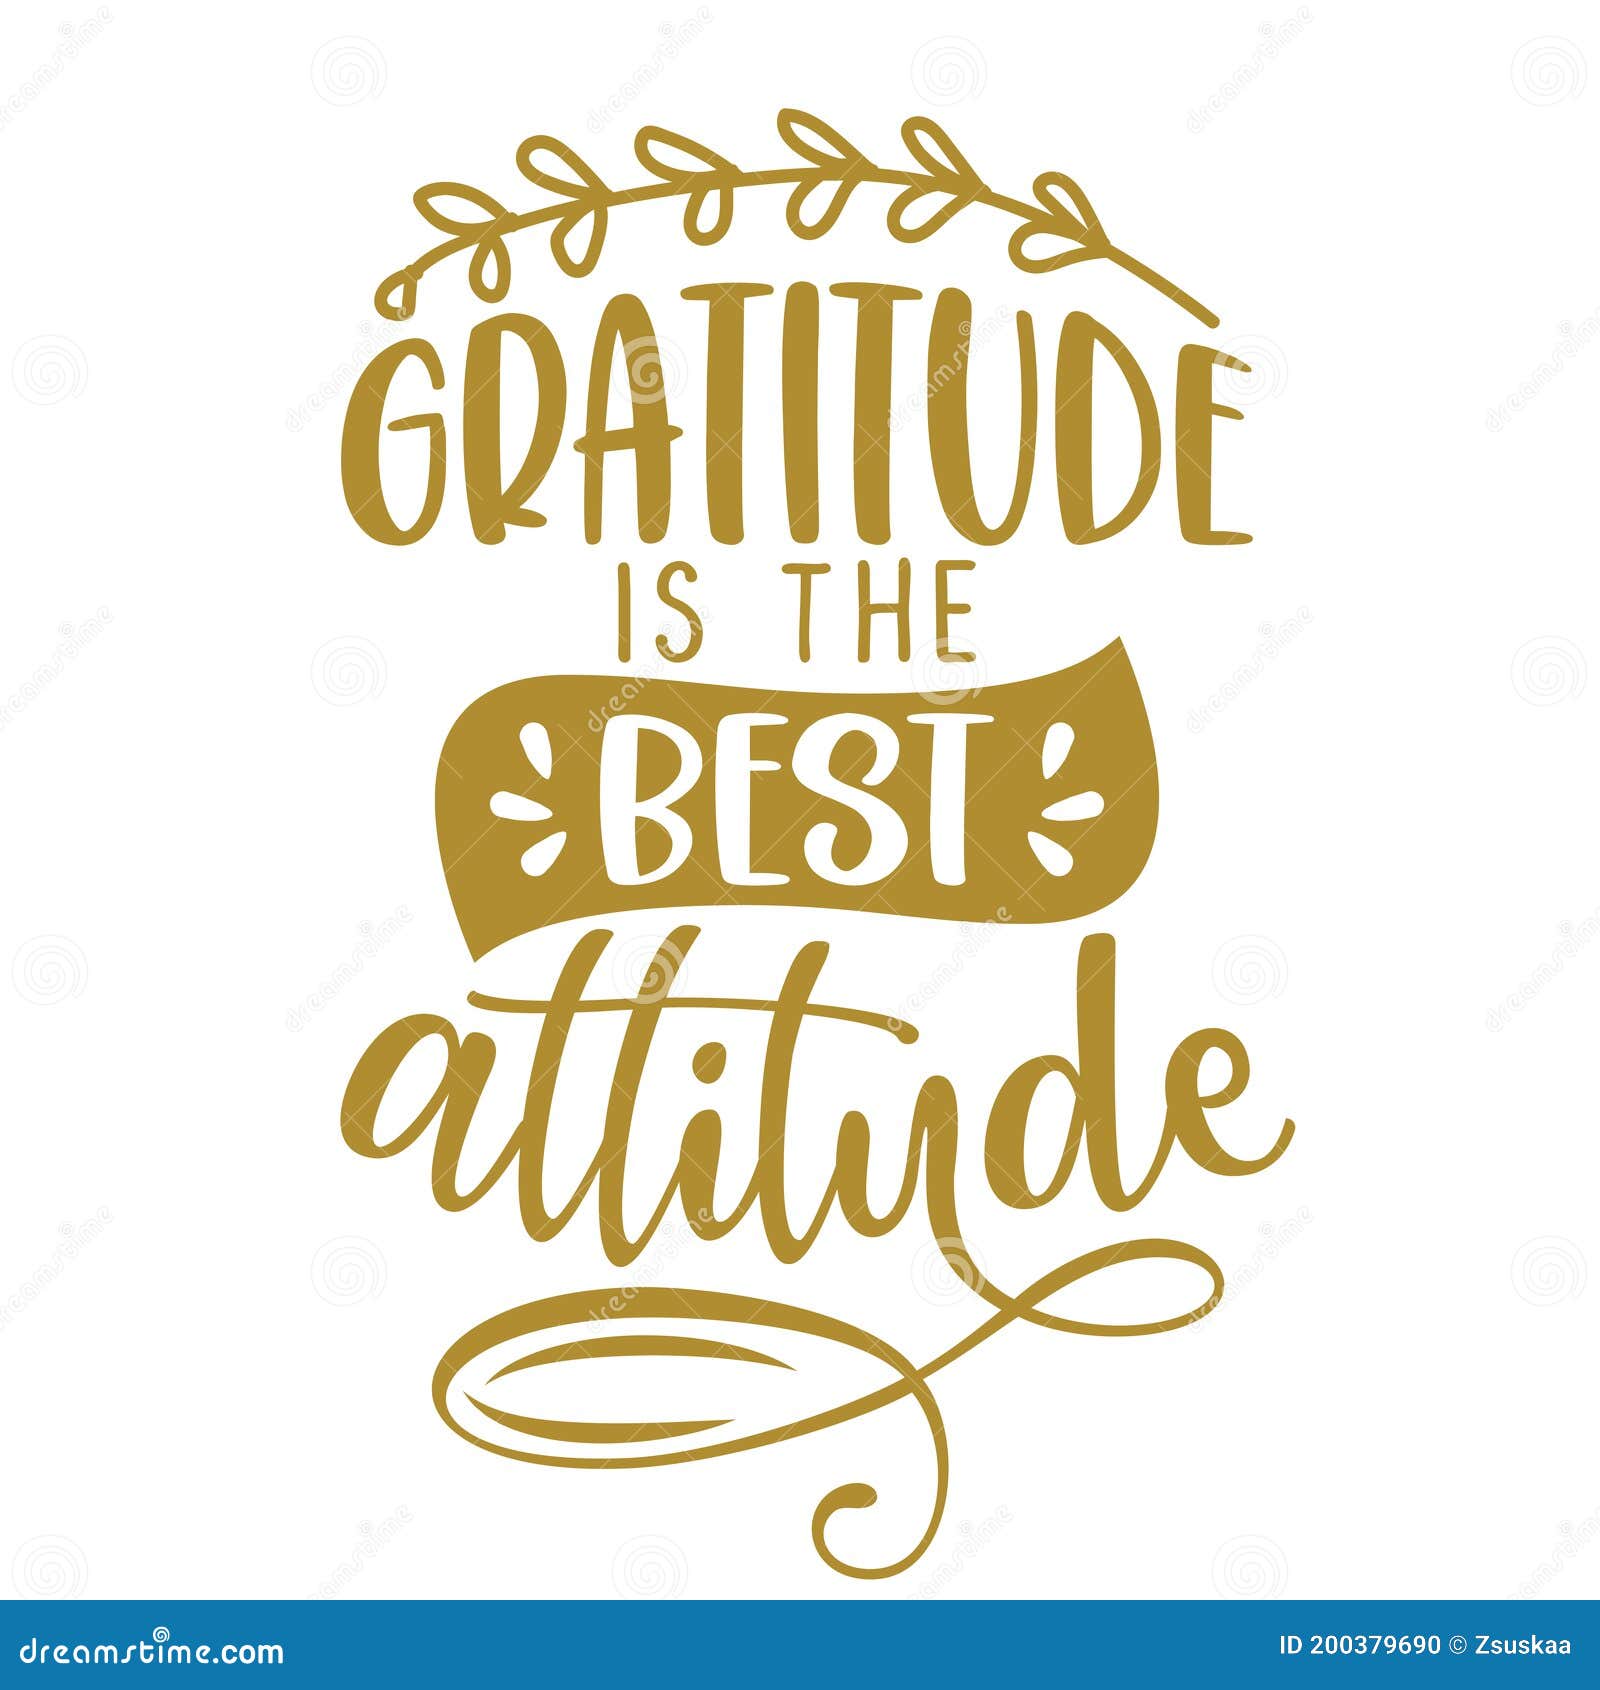 gratitude is the best attitude - inspirational thanksgiving quote